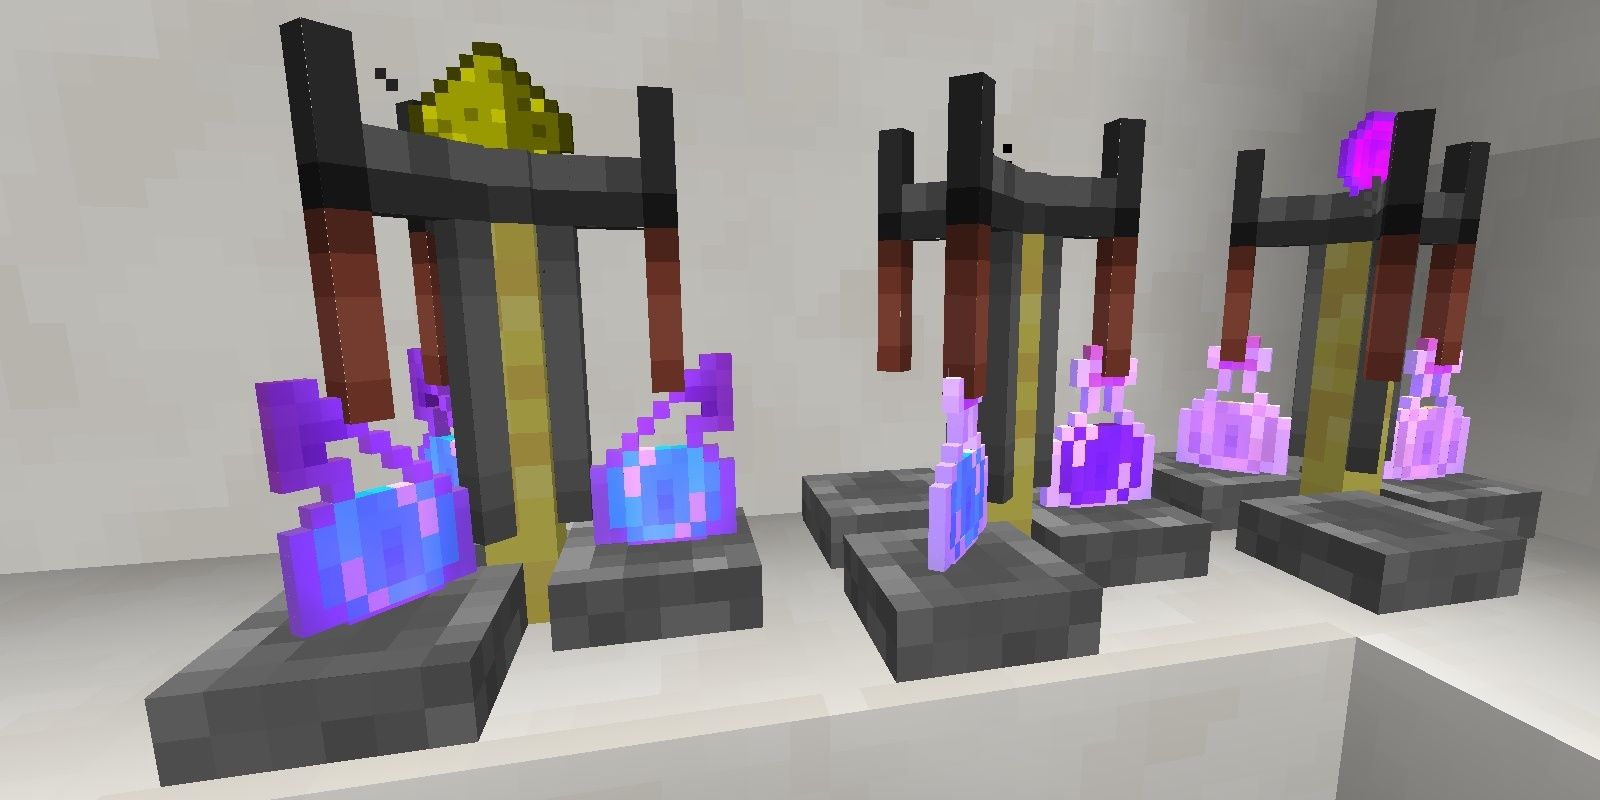 Minecraft Potioncore Mod Brewing Stations Glowstone And Splash Potion Effect